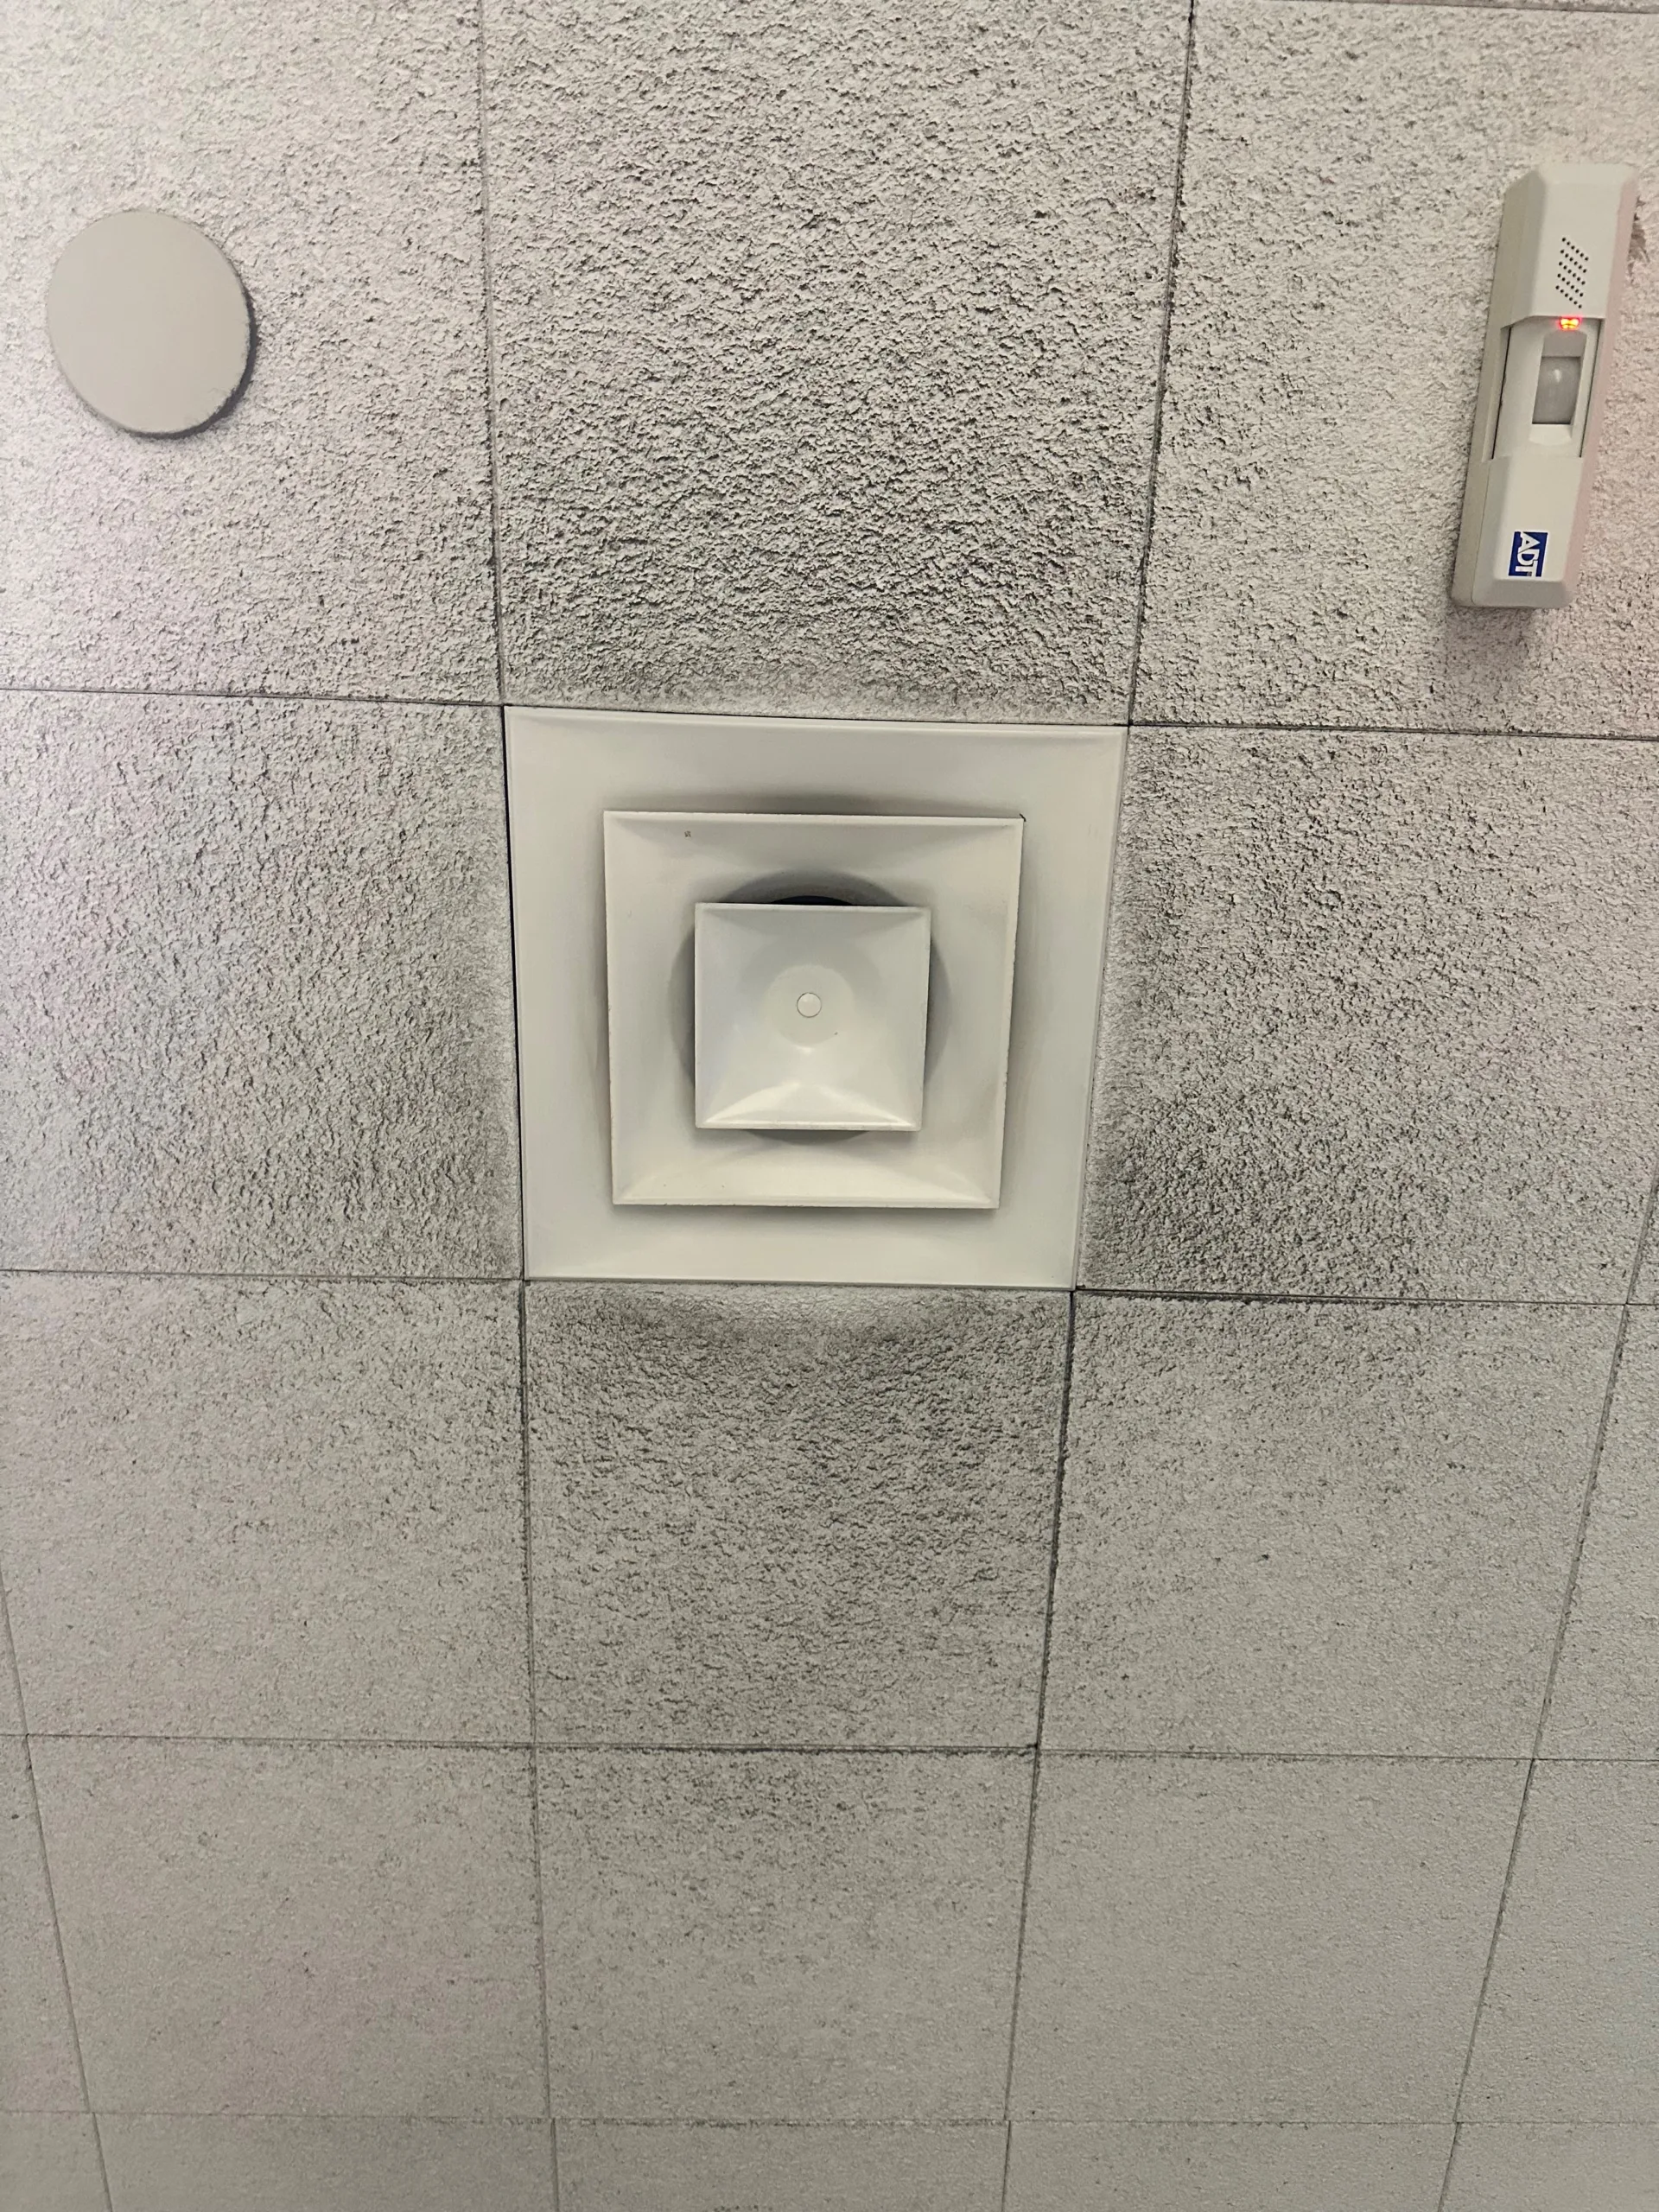 CLean vent but dirty celing tiles around